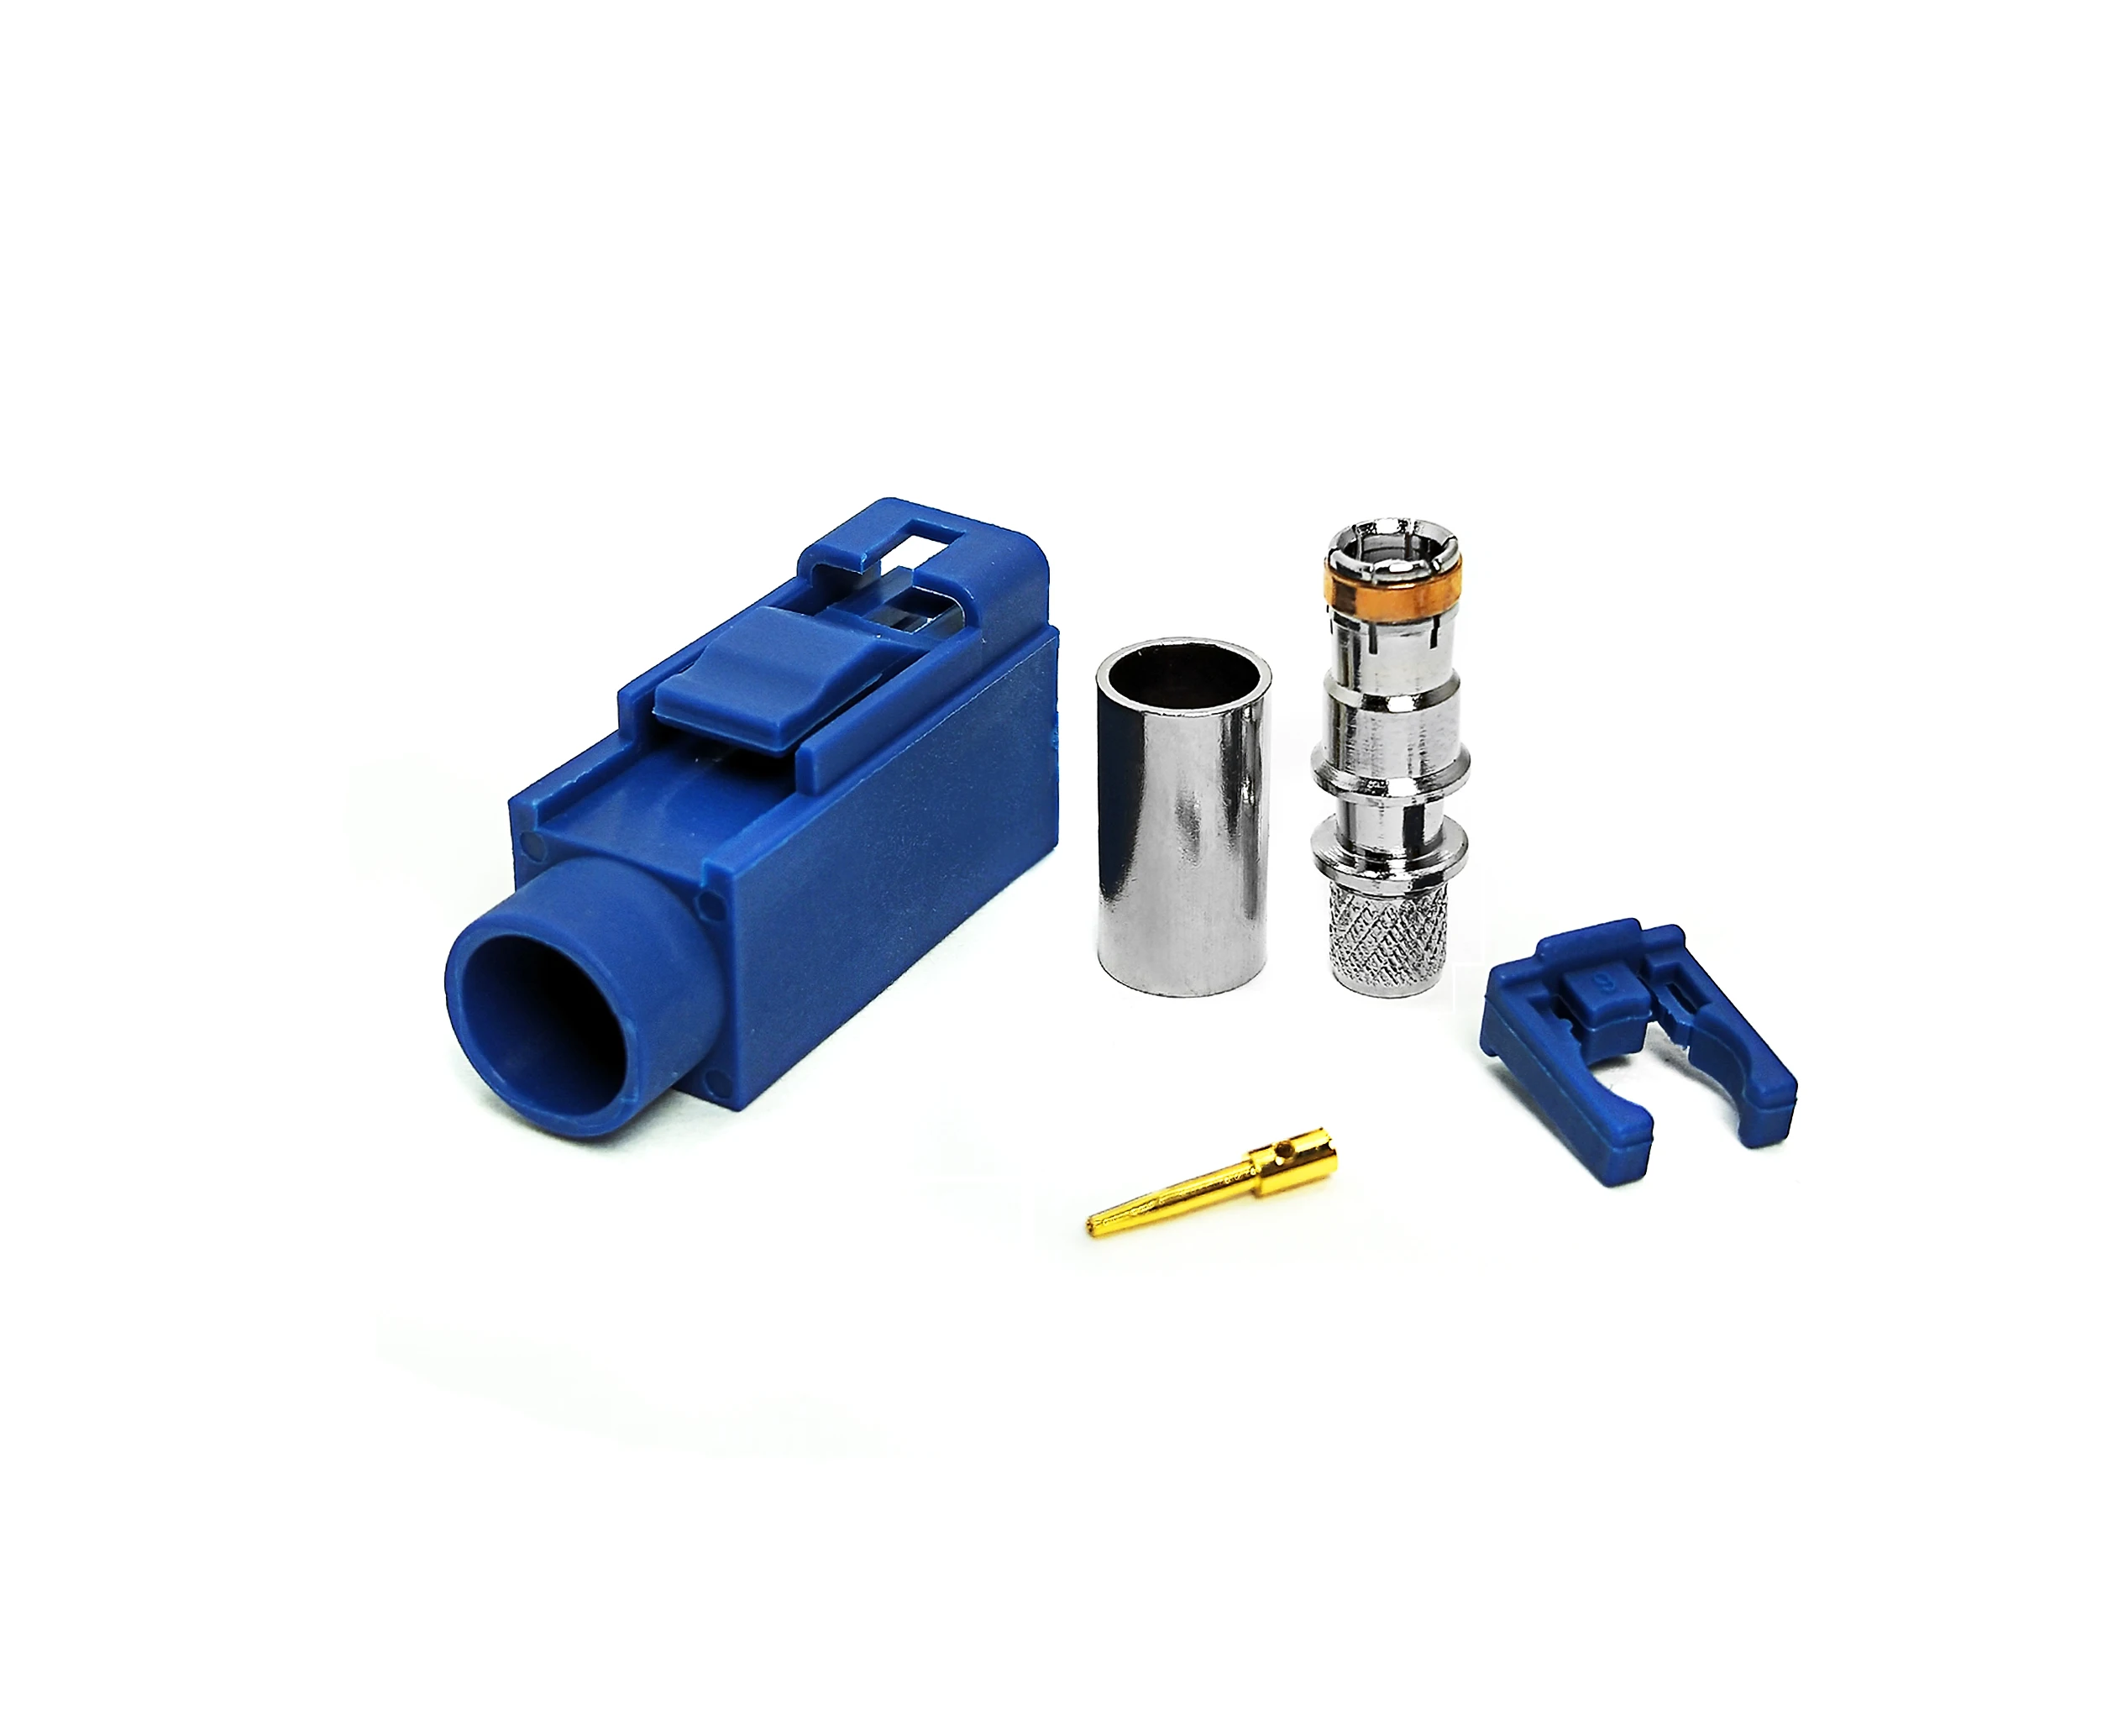 RF Coaxial SMB Female Jack blue fakra Crimp Straight Connector for rg58  Cable Fakra manufacture